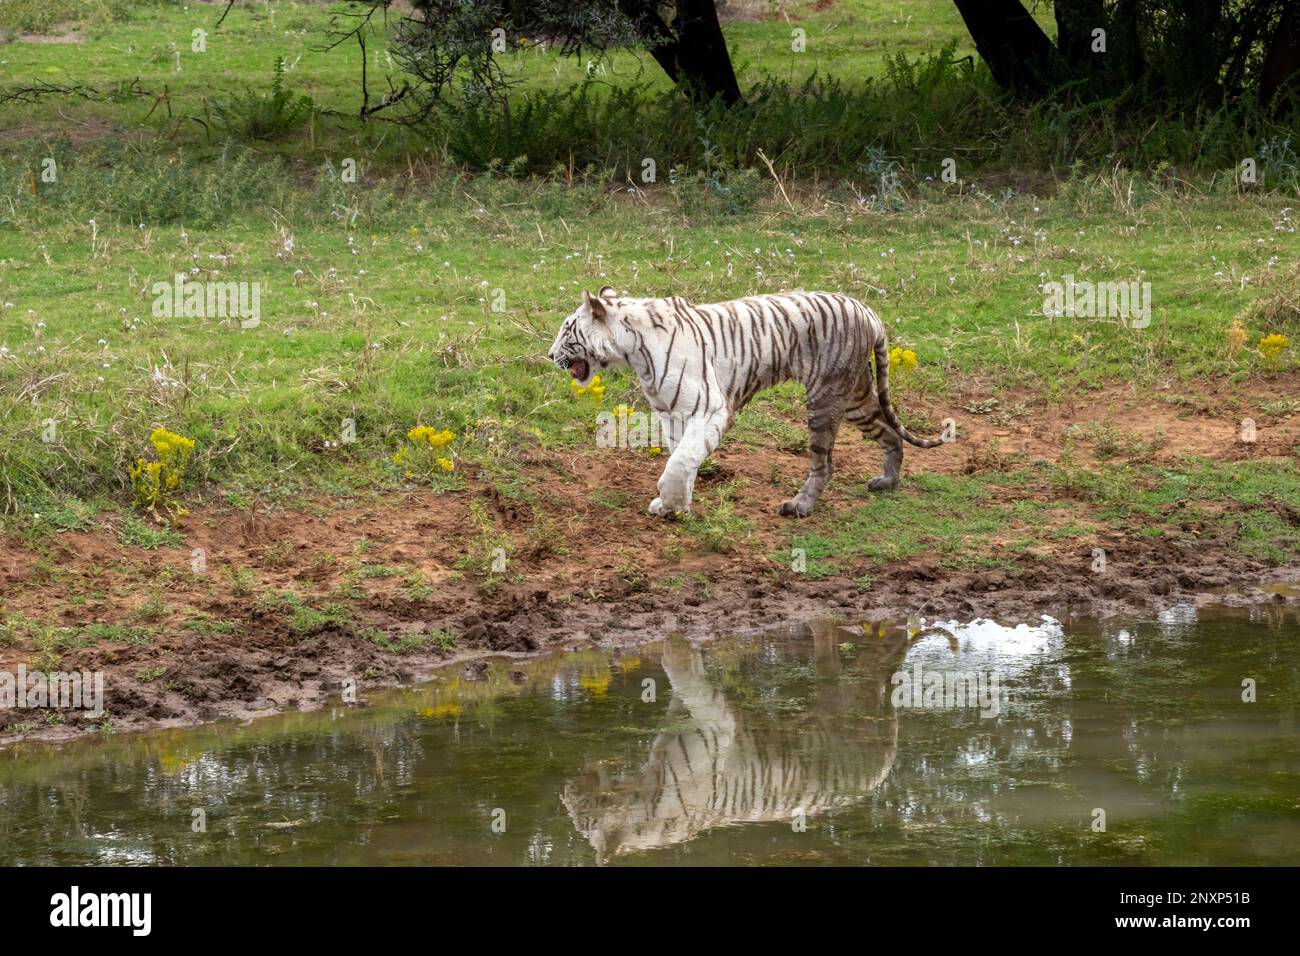 Rare Wild White Tiger walking along a Pond casting a Reflection Stock Photo